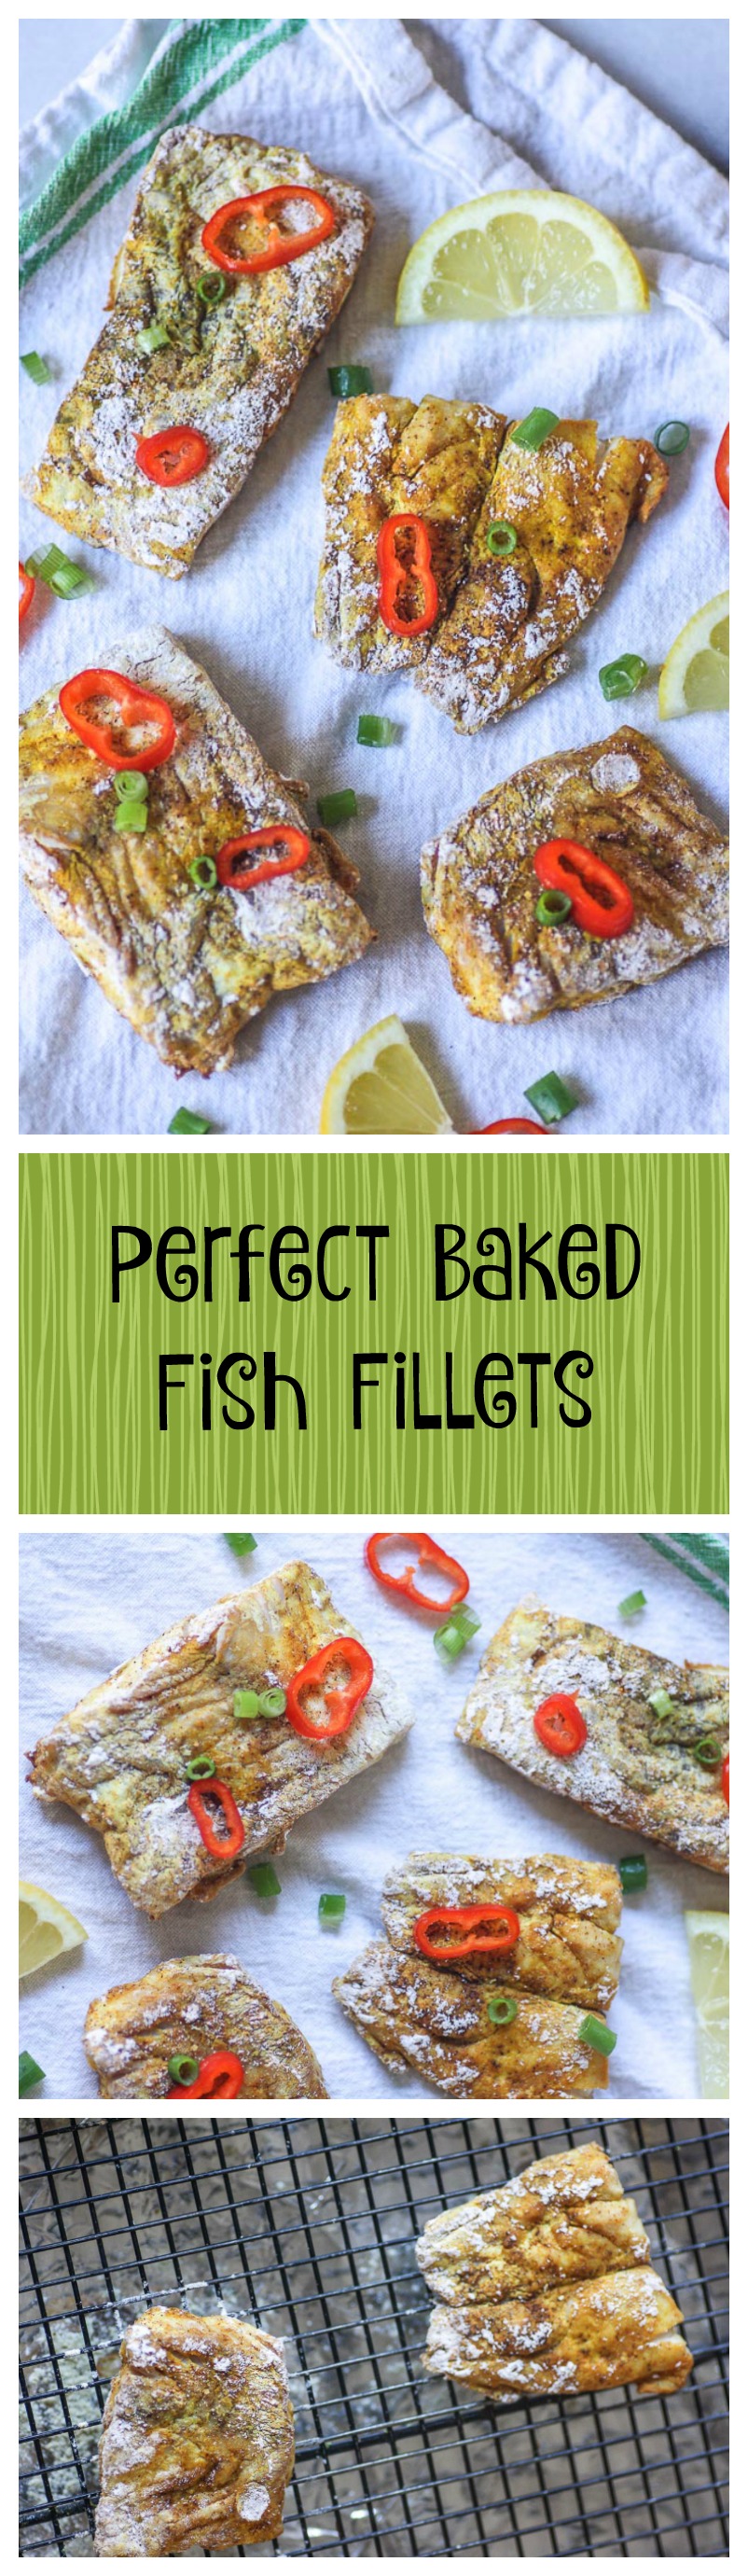 Perfect Baked Fish Fillets